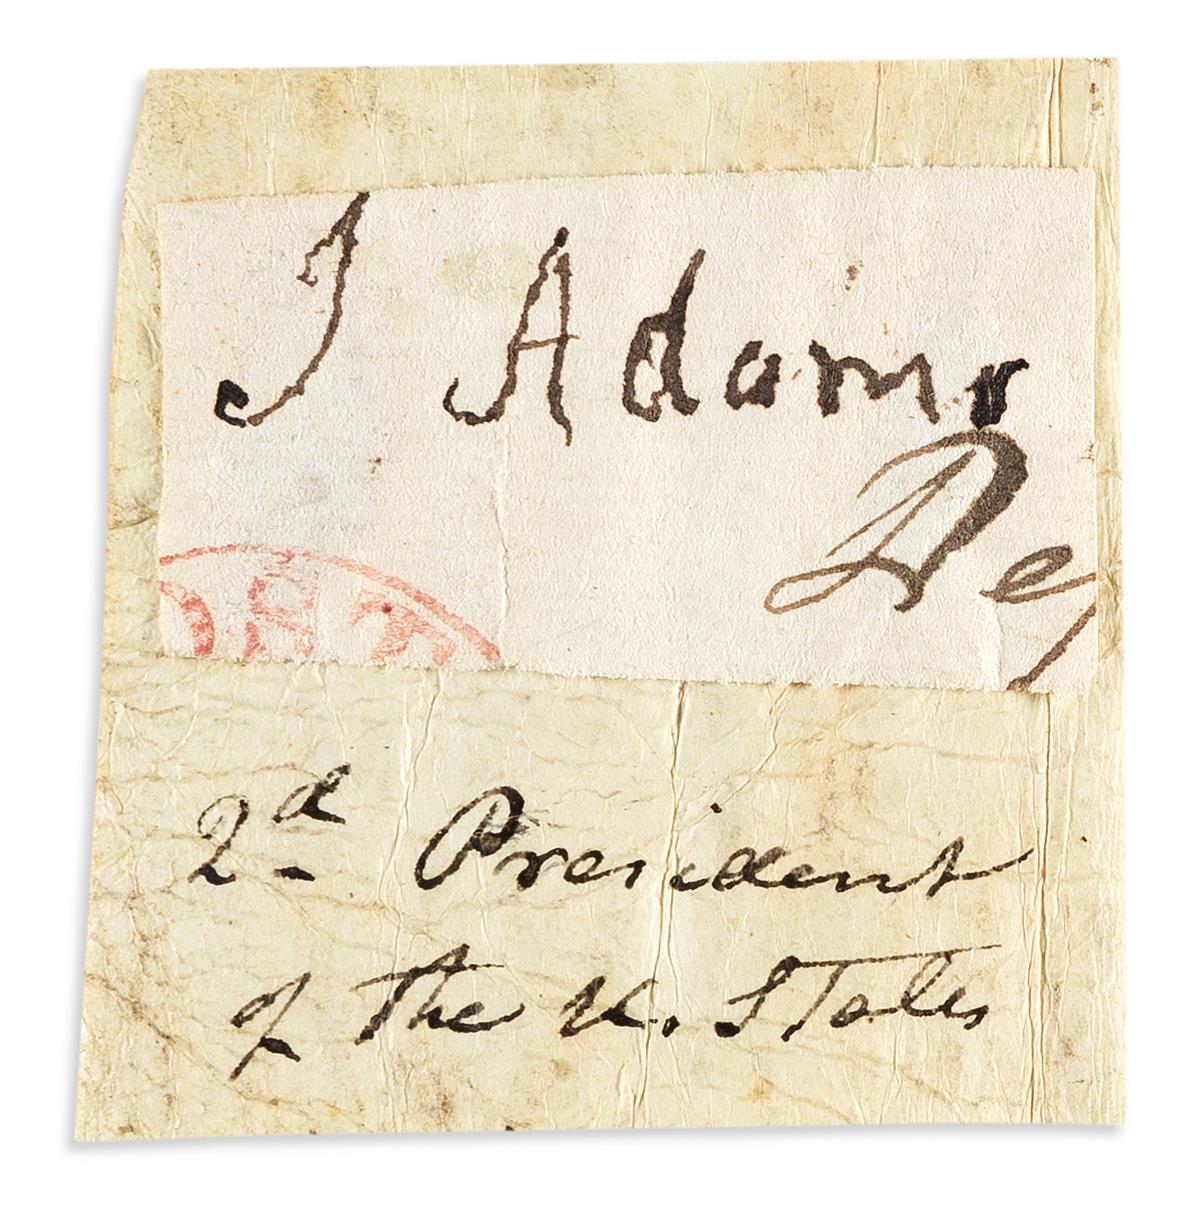 ADAMS, JOHN. Clipped Signature, J Adams, likely a franking signature removed from an address panel, mounted to a strip of vellum.